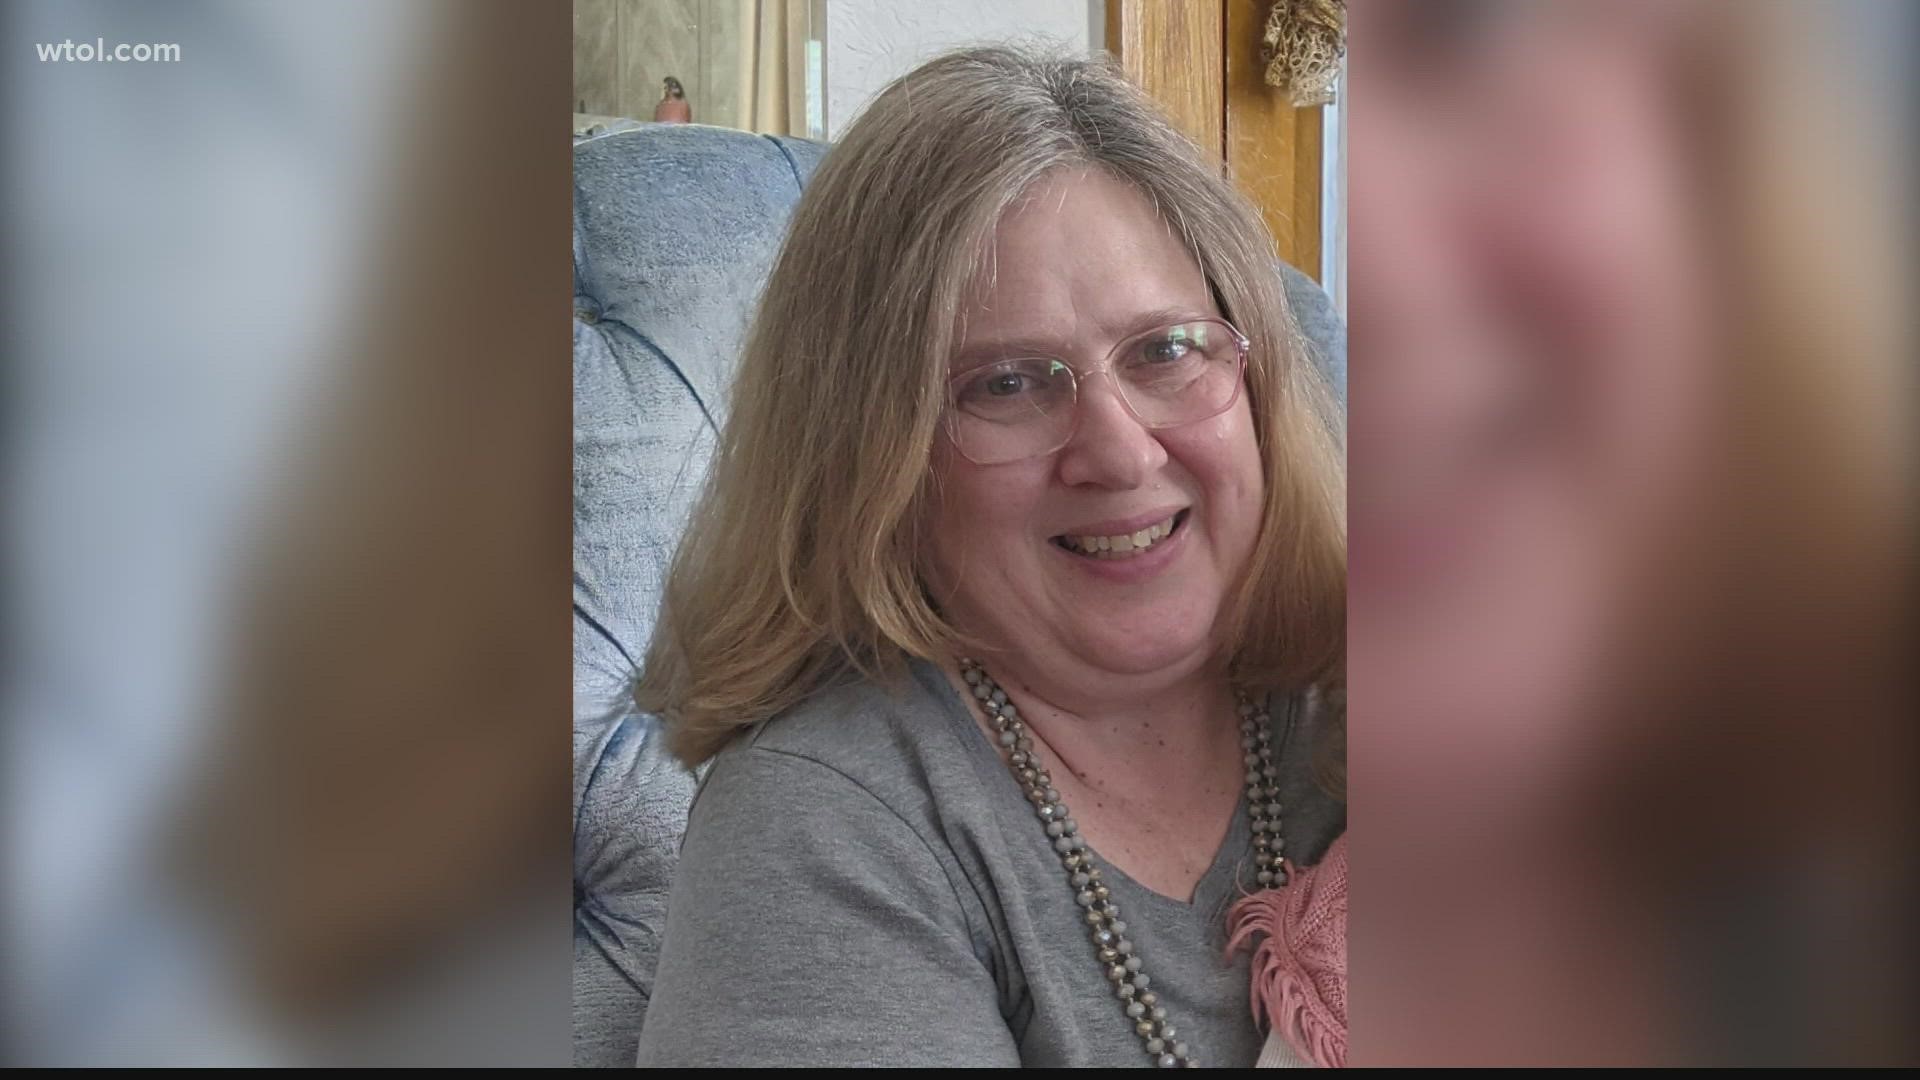 The woman was reported missing early on Saturday morning. Her husband says she was upset about something.